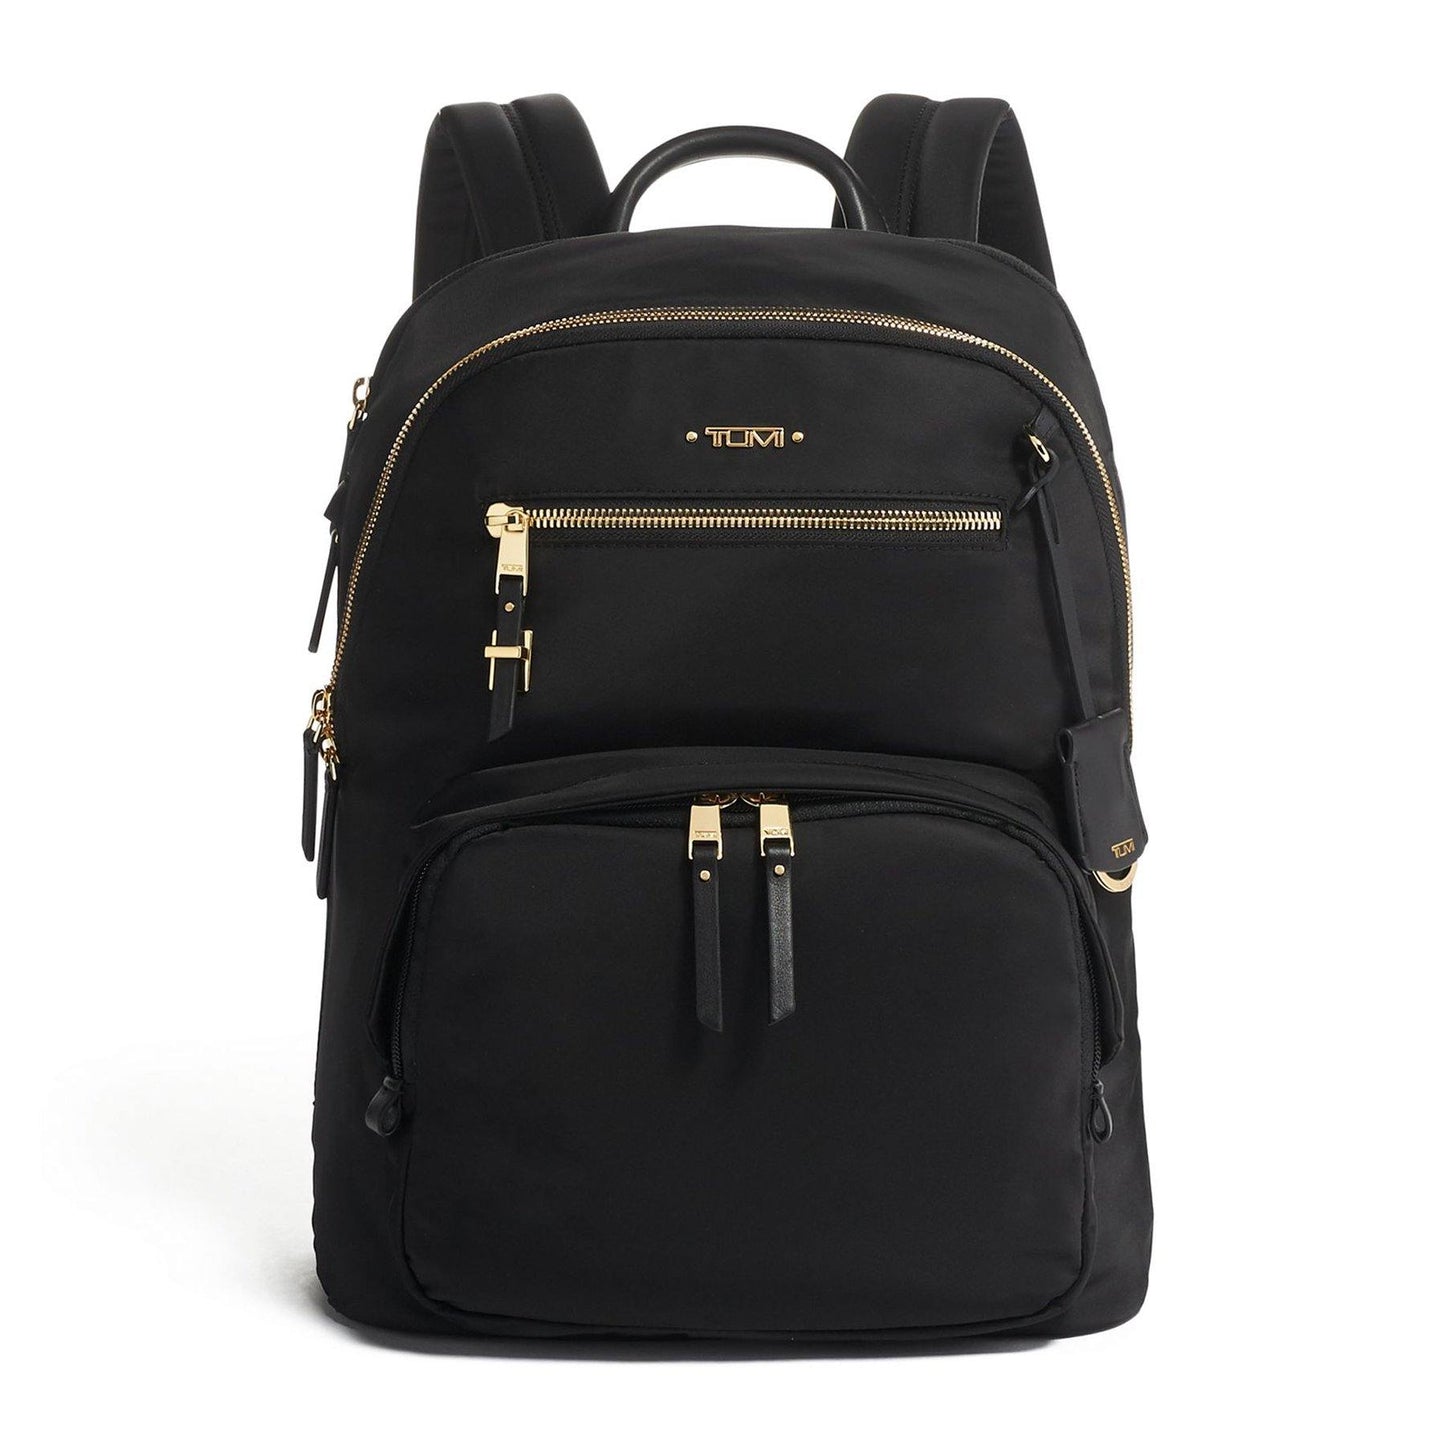 Hilden Backpack 0196301D - Cosmos Boutique New Jersey